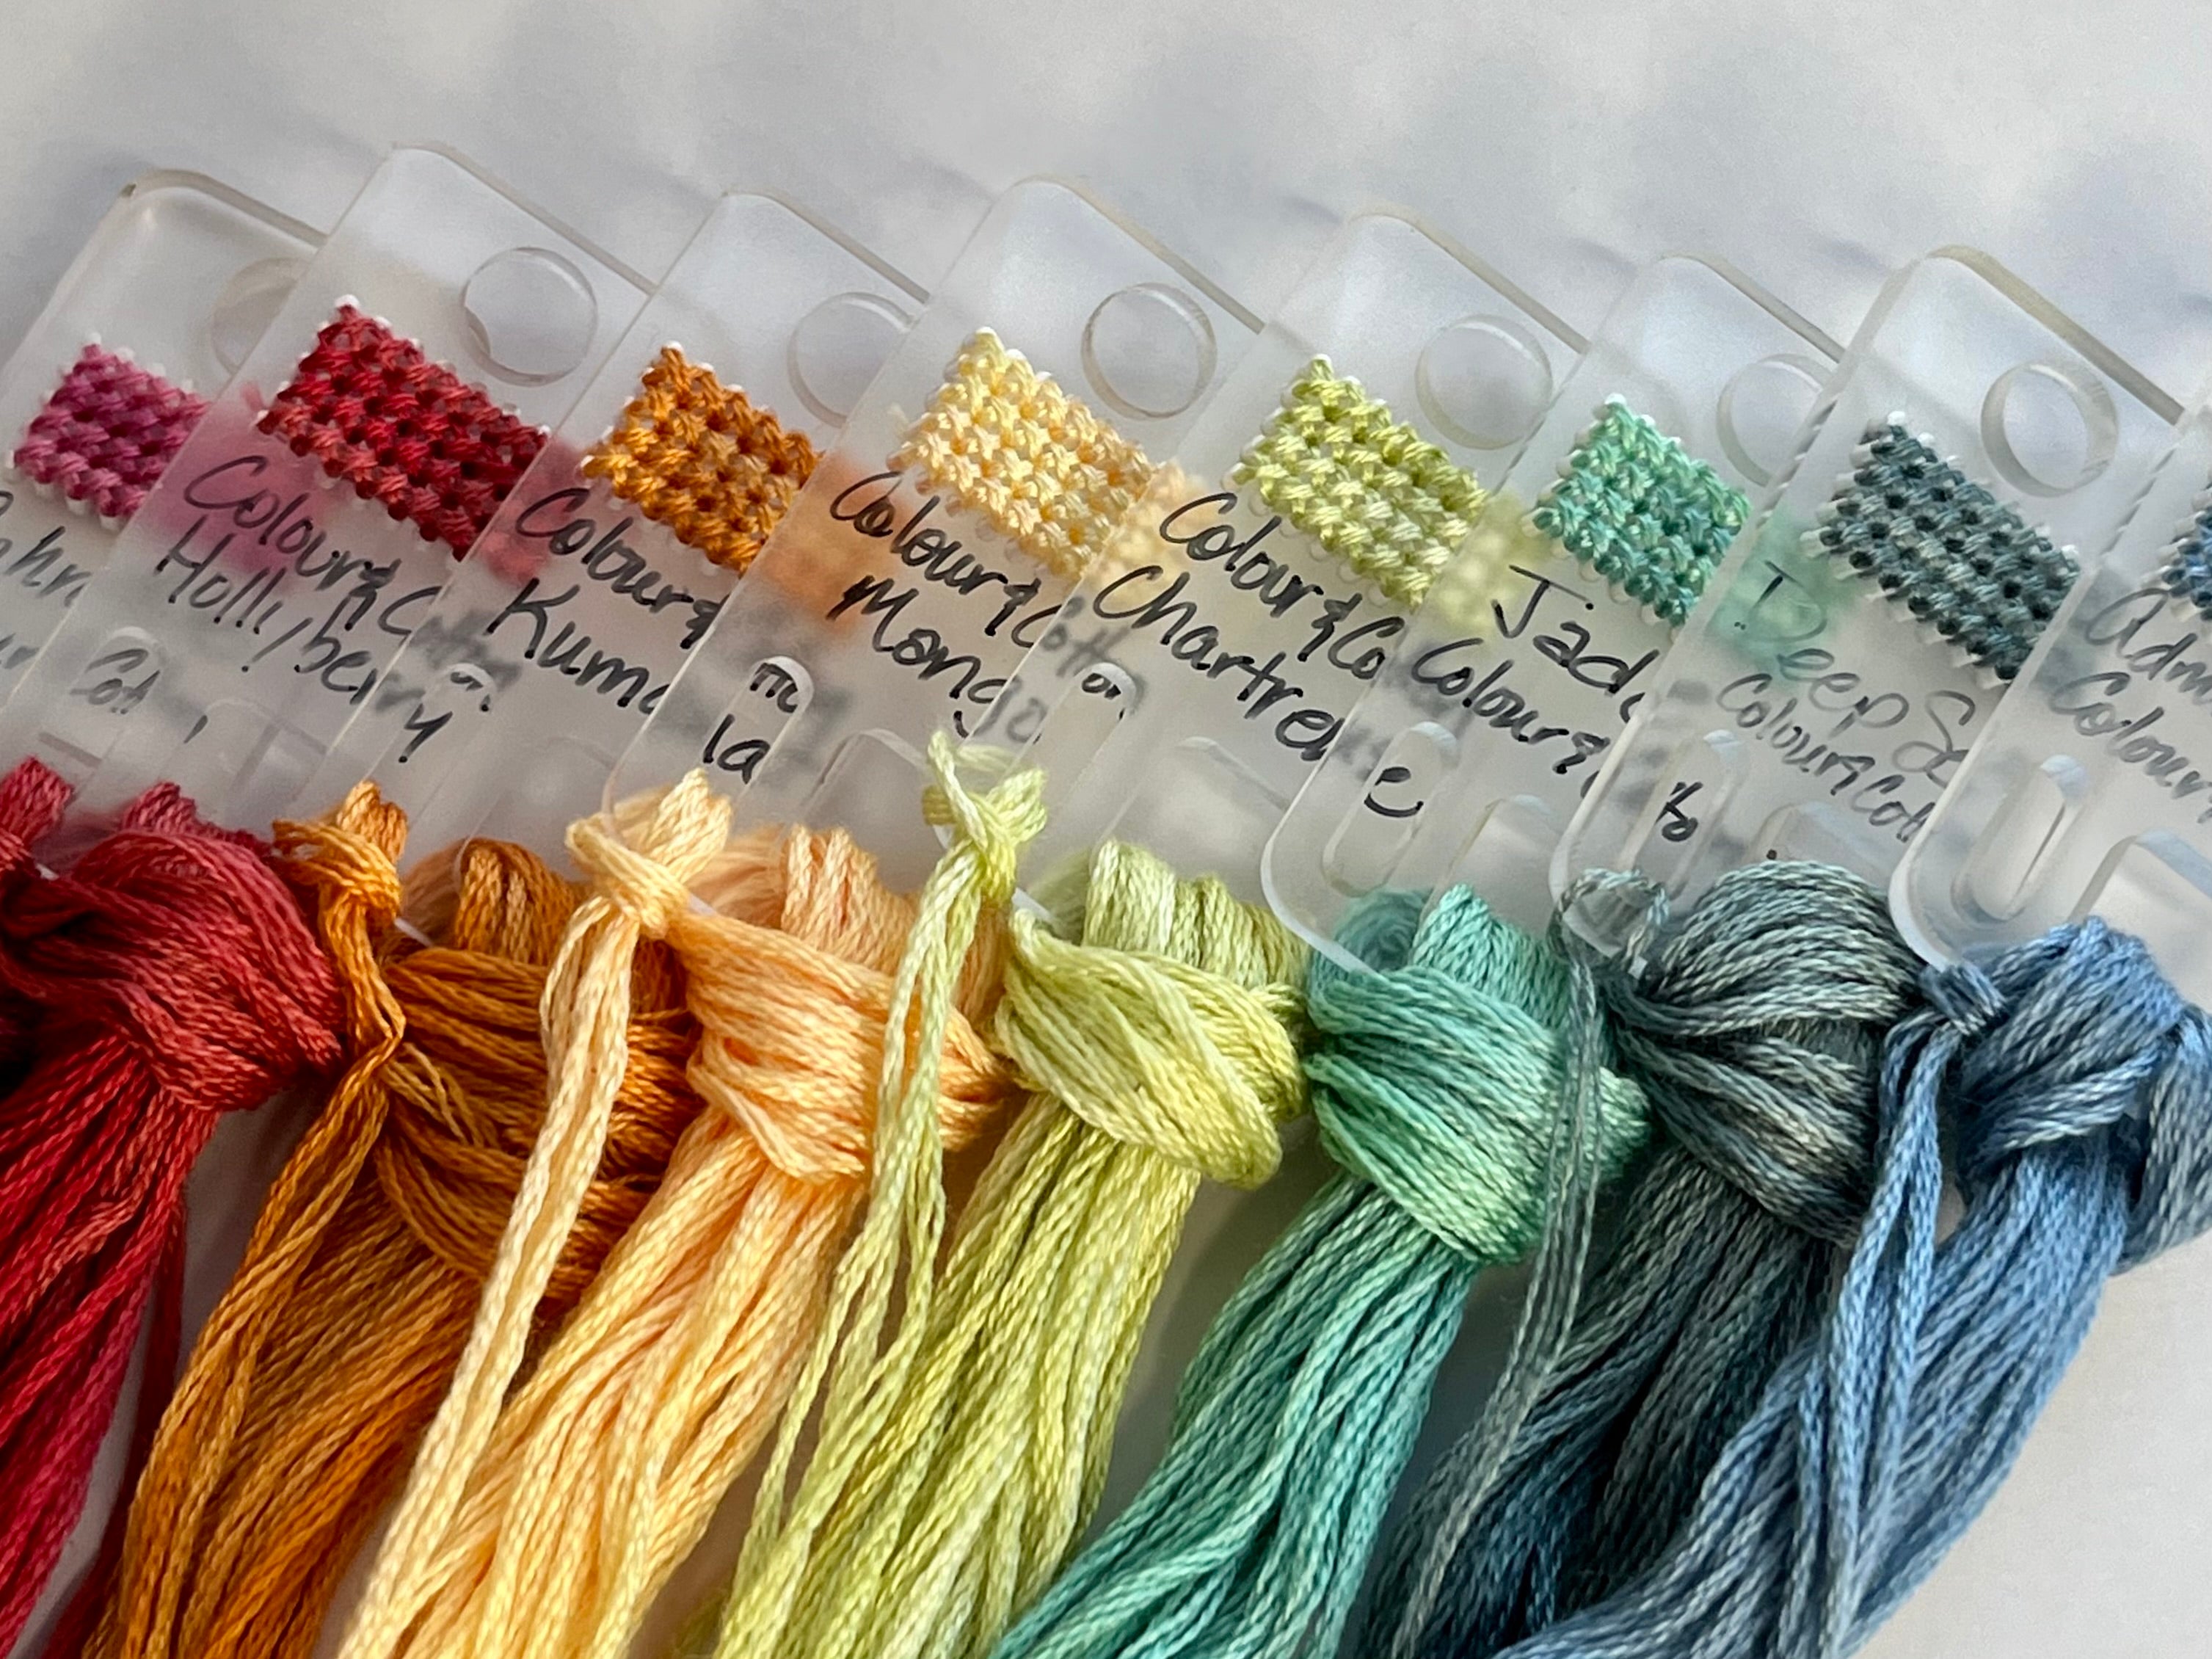 Embroidery Floss Swatch Drops - Stitched Modern